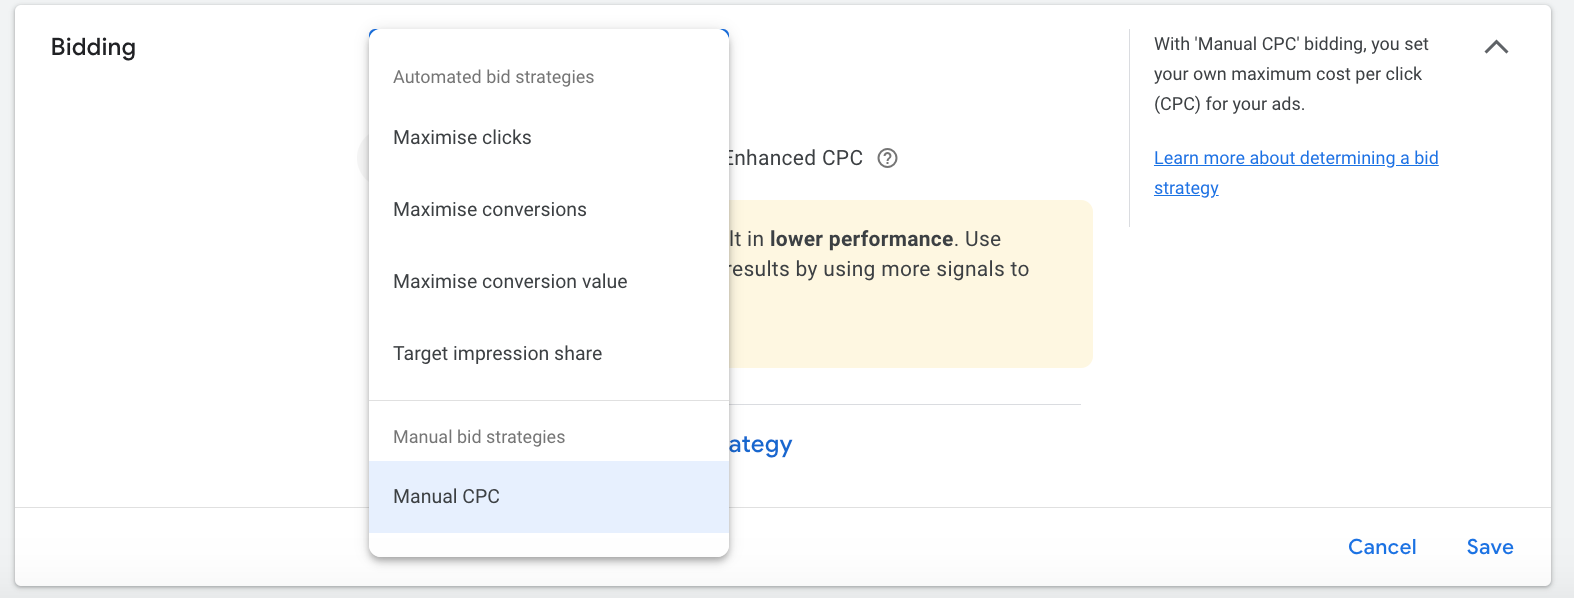 A screenshot showcasing the Google Ads campaign settings interface, highlighting the section where users can easily change their bidding strategy to optimize campaign performance.